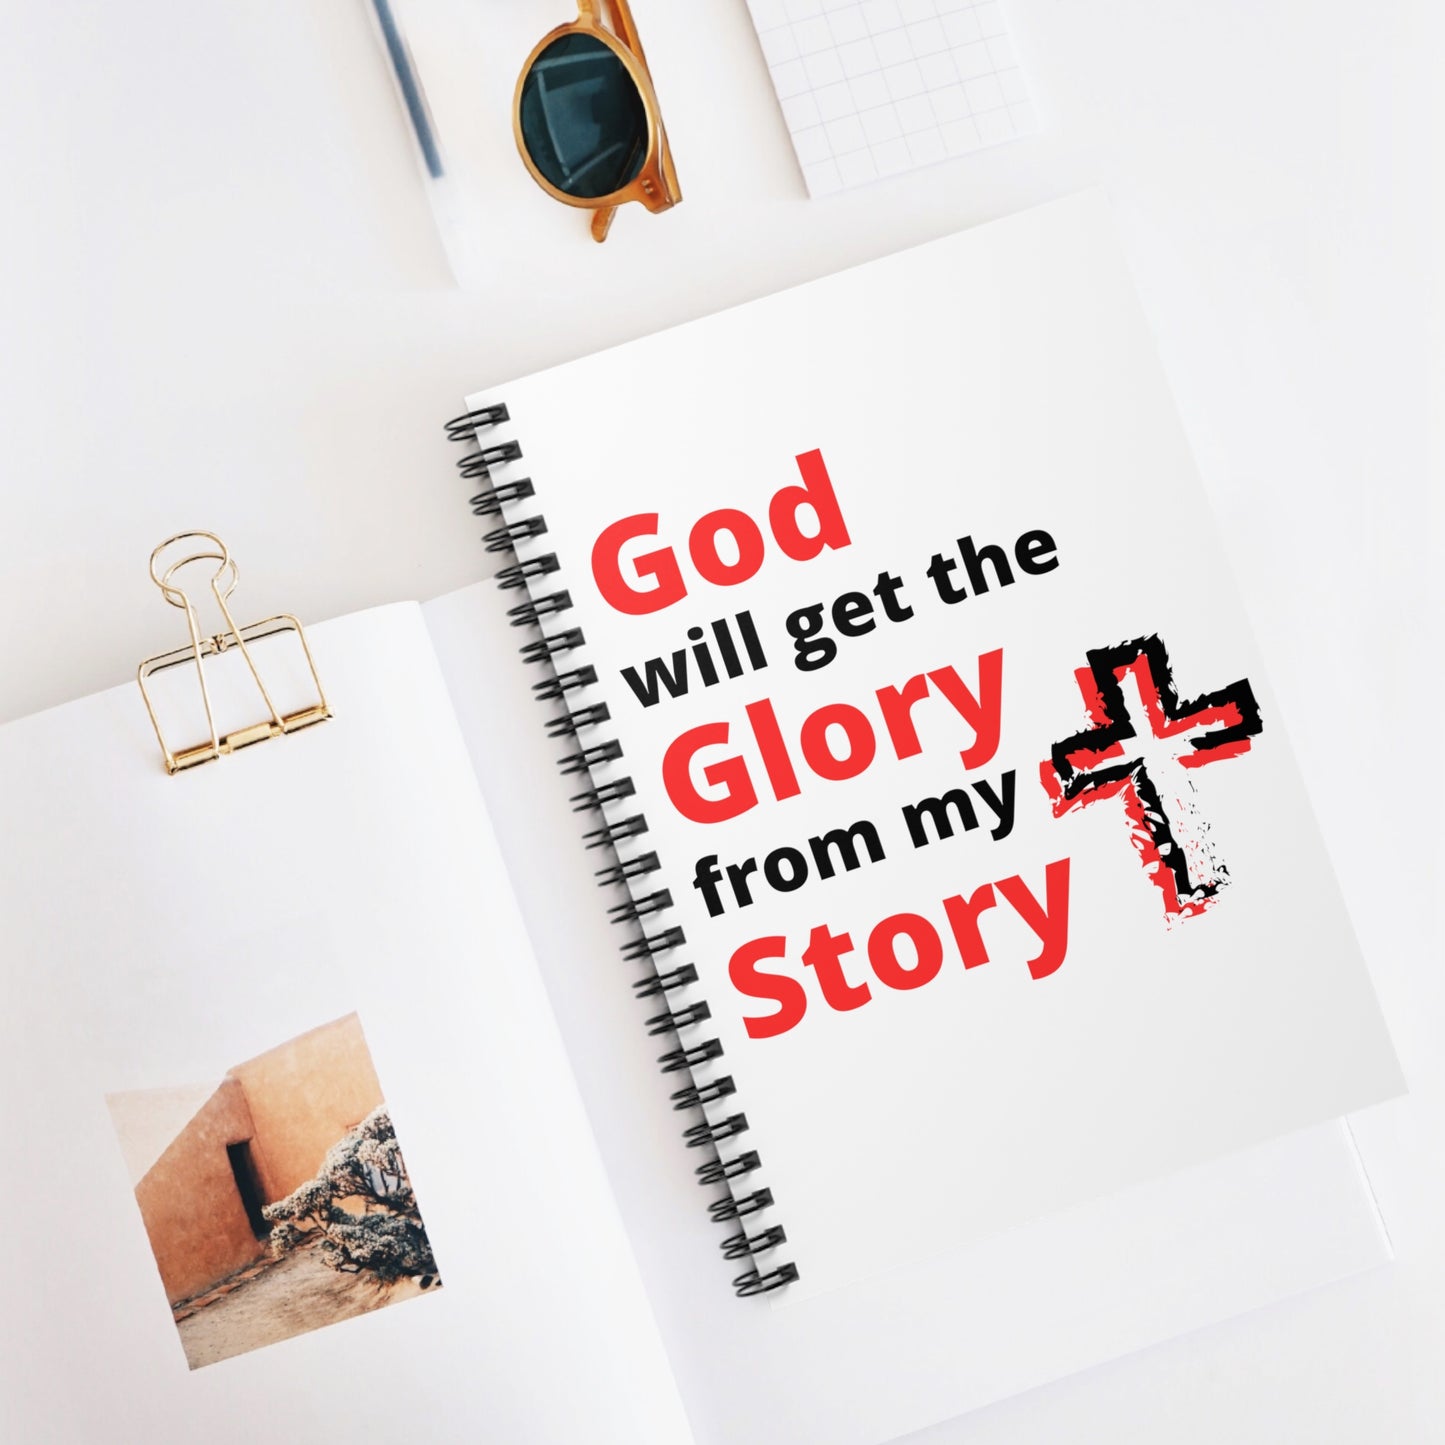 God will get the Glory from my Story (Red Design with a Cross) Spiral Notebook - Ruled Line